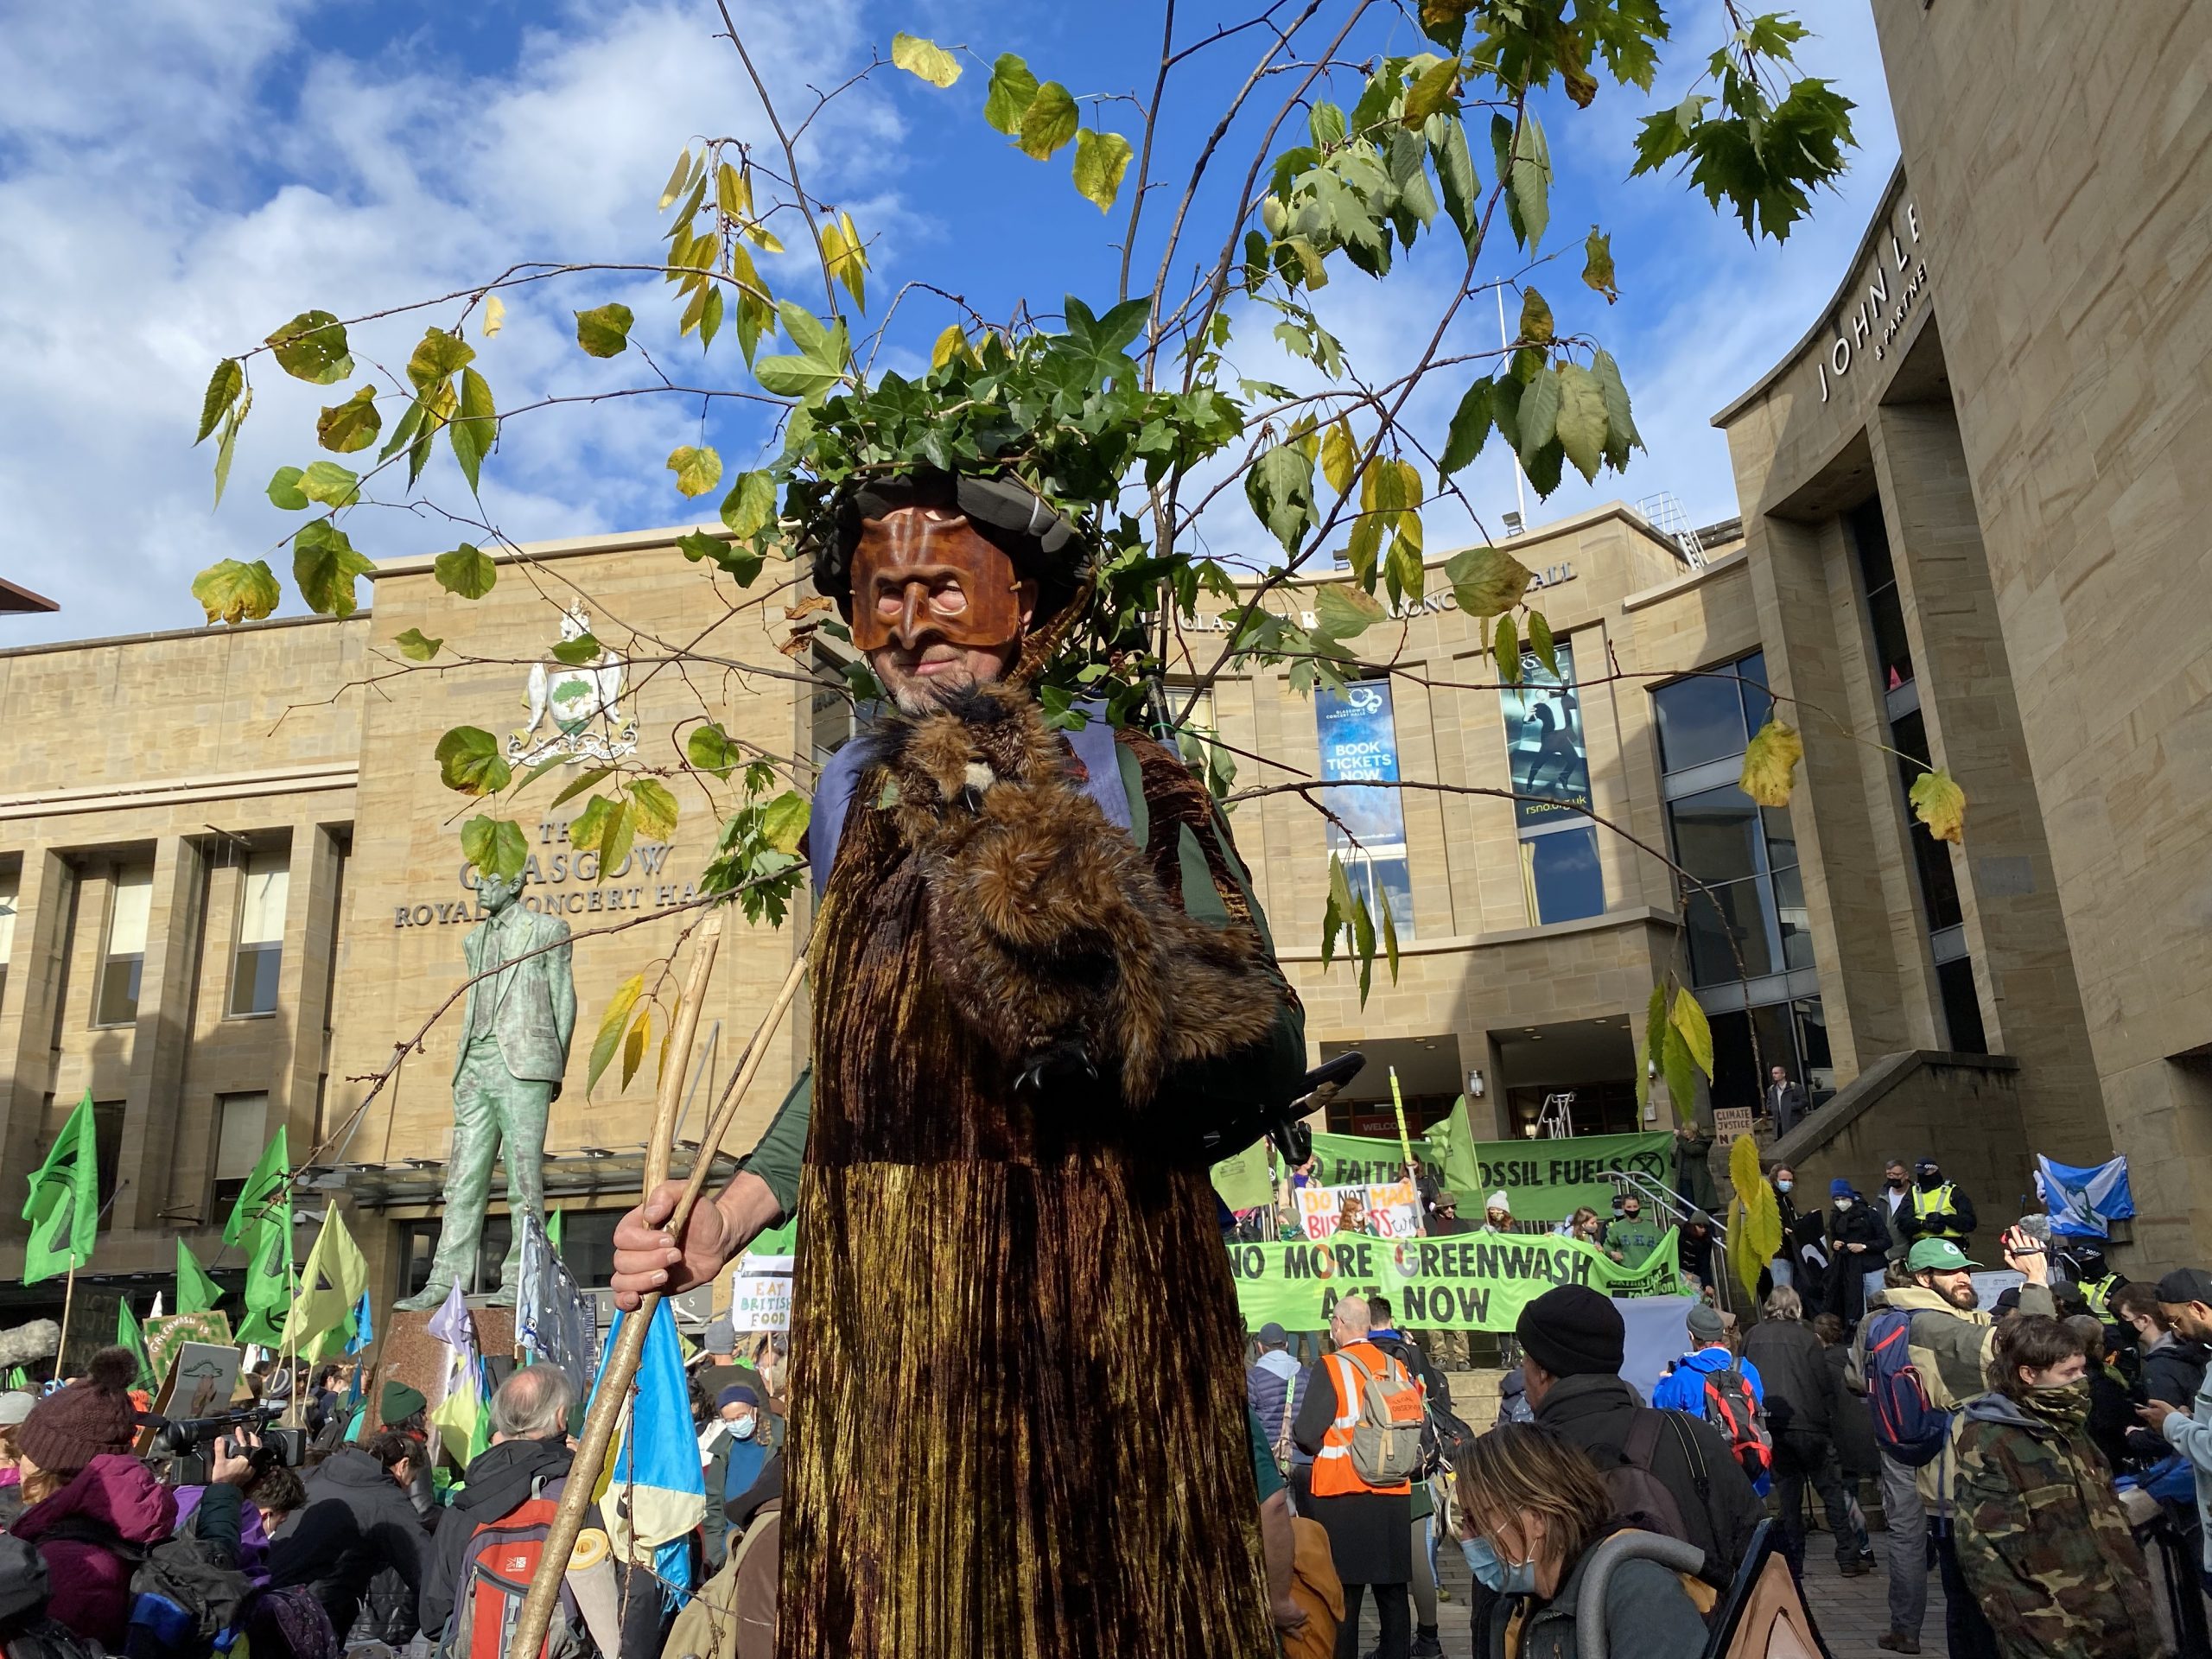 A man calling himself 'Stumpy' walks on stilts through the streets of Glasgow at the Extinction Rebellion demo dressed in a full tree costume.